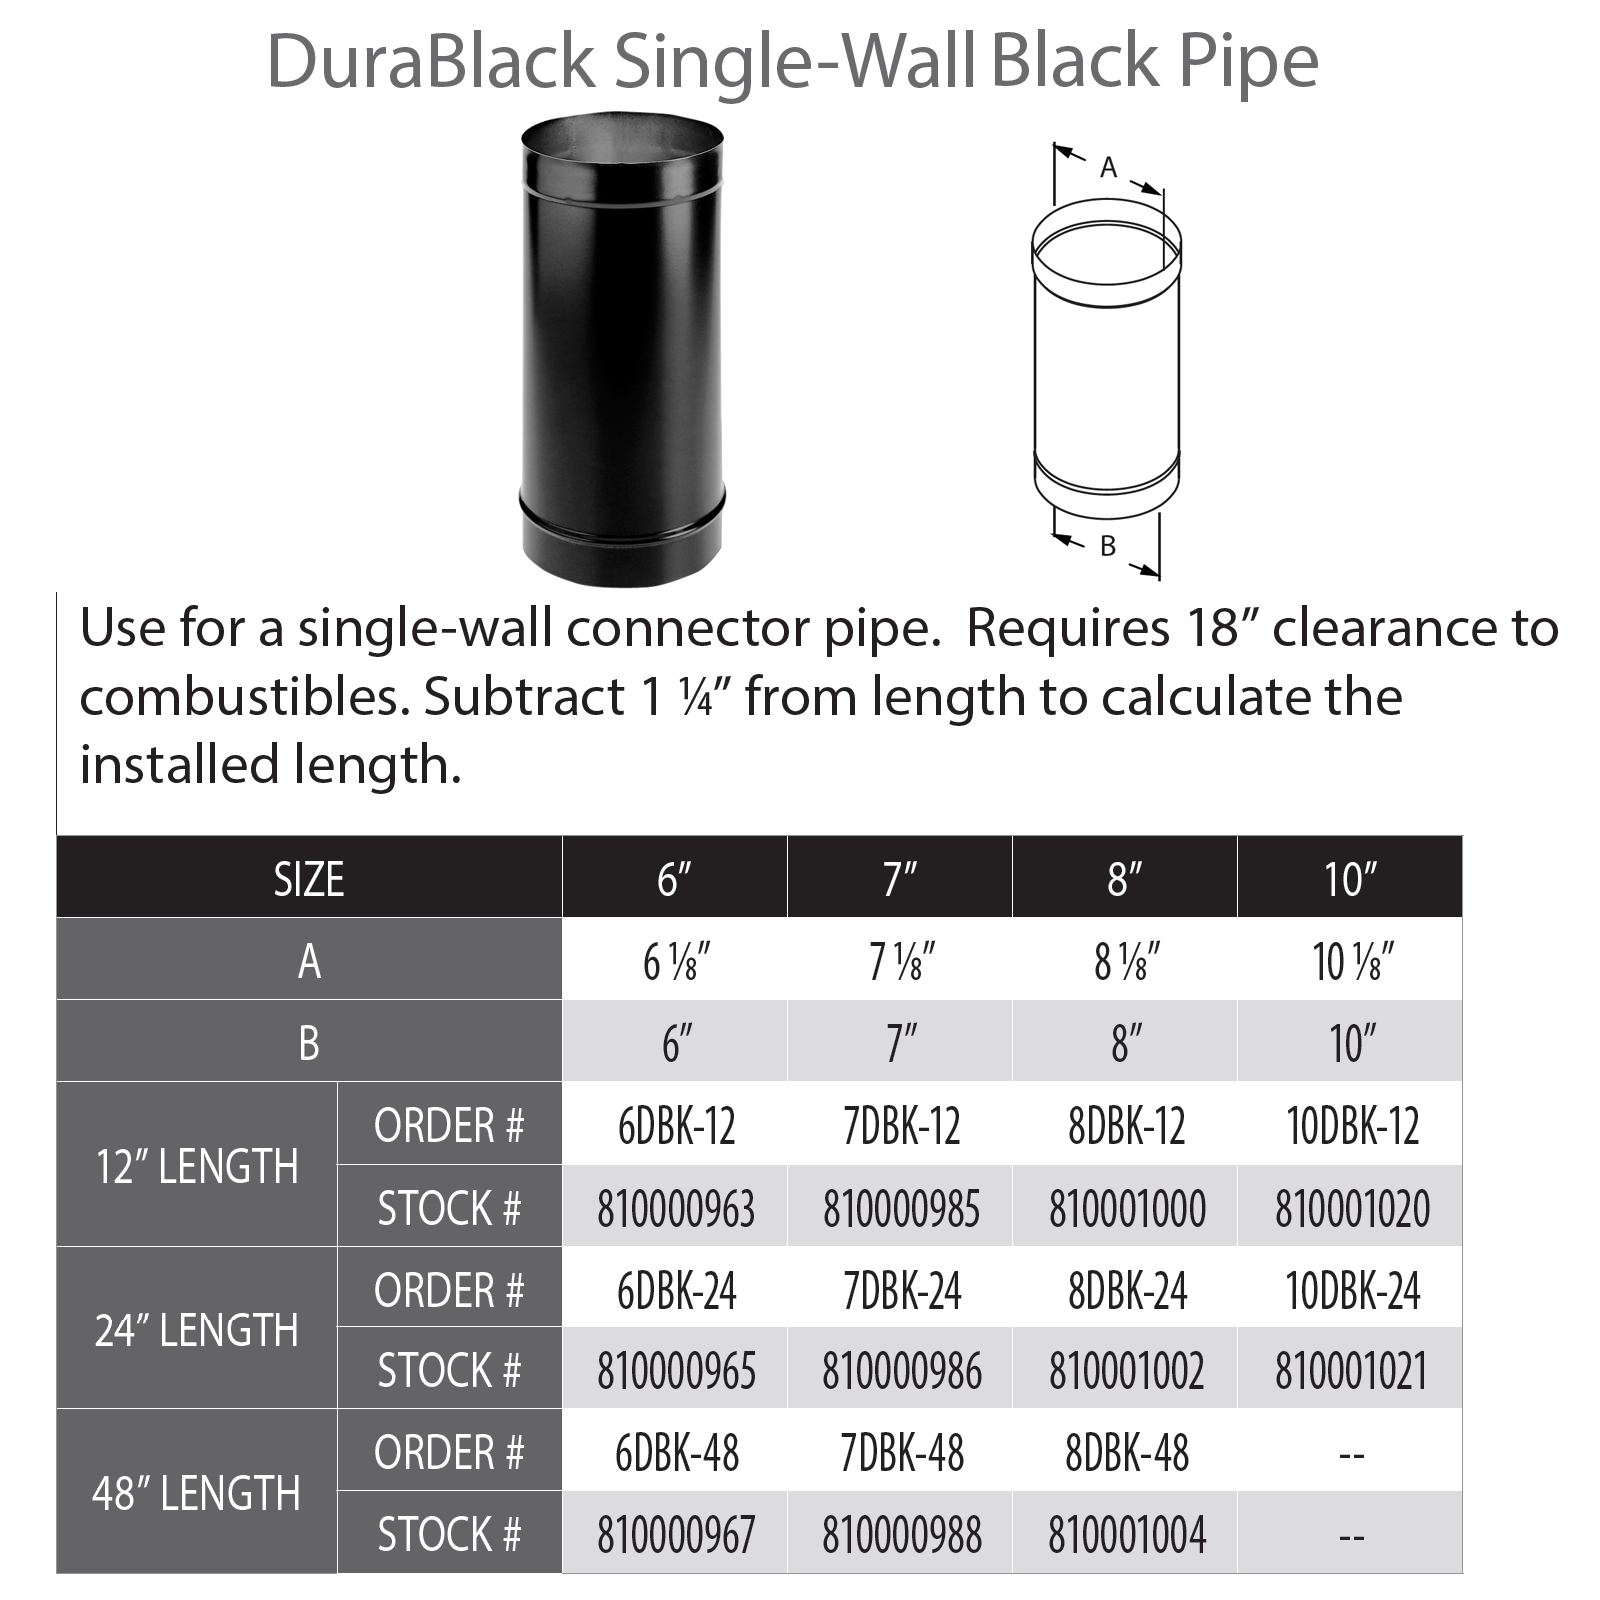 DuraVent DuraBlack 6DBK-12 6 Inch Single Wall Steel Wood Burning Adjustable  Chimney Stove Pipe Connector to Vent Smoke and Exhaust, Black - Ducting  Components 